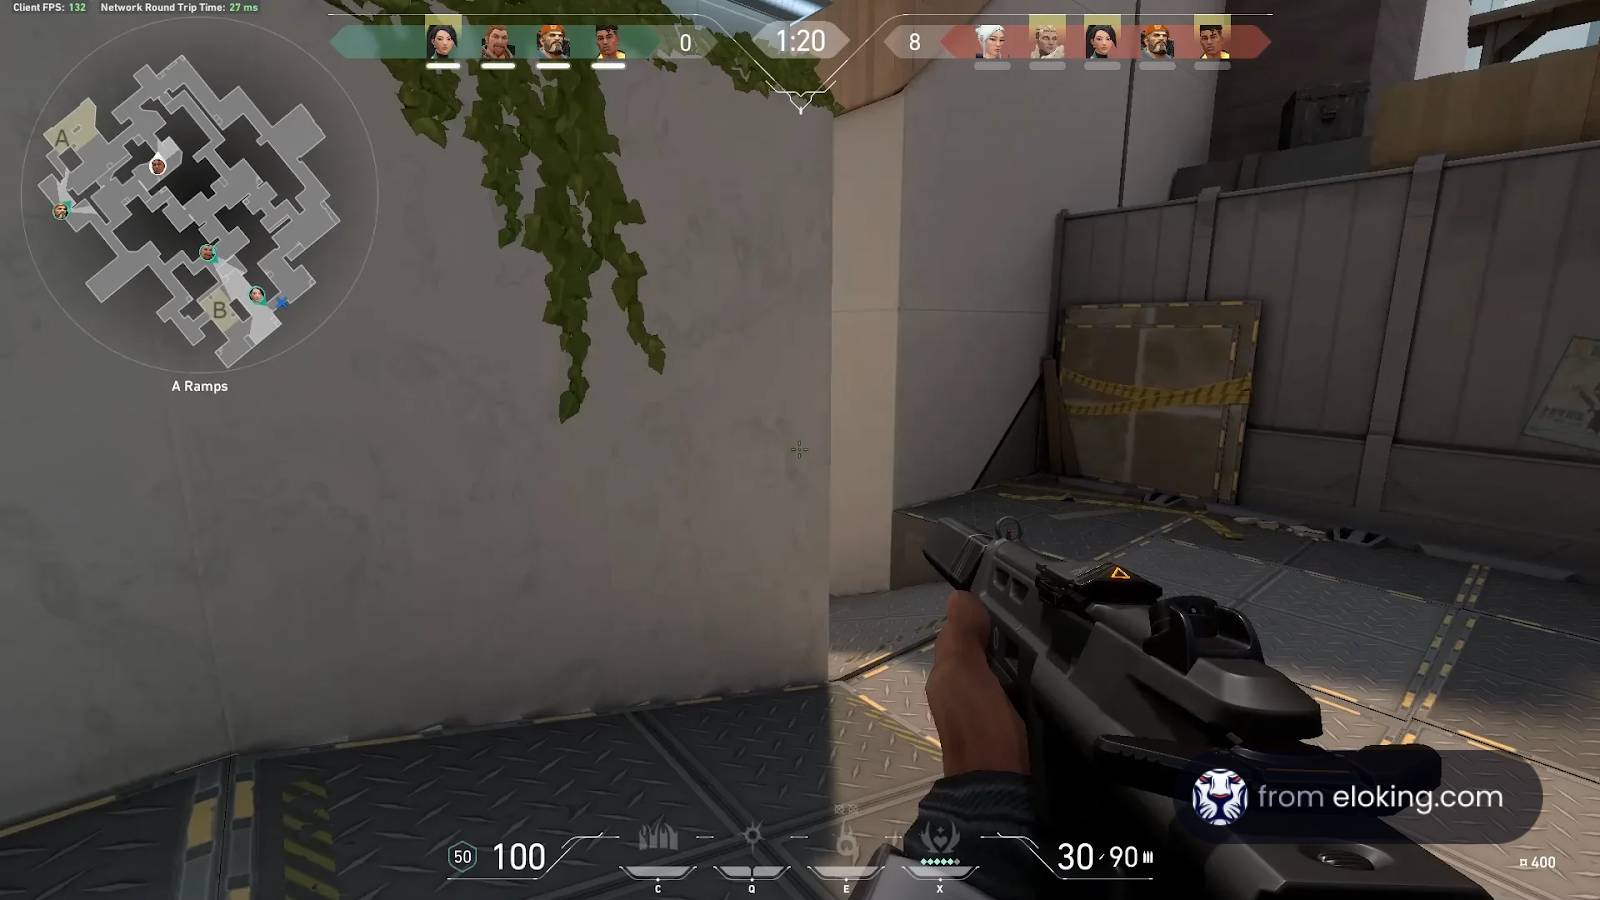 First-person view of a player holding a rifle in a competitive shooter game